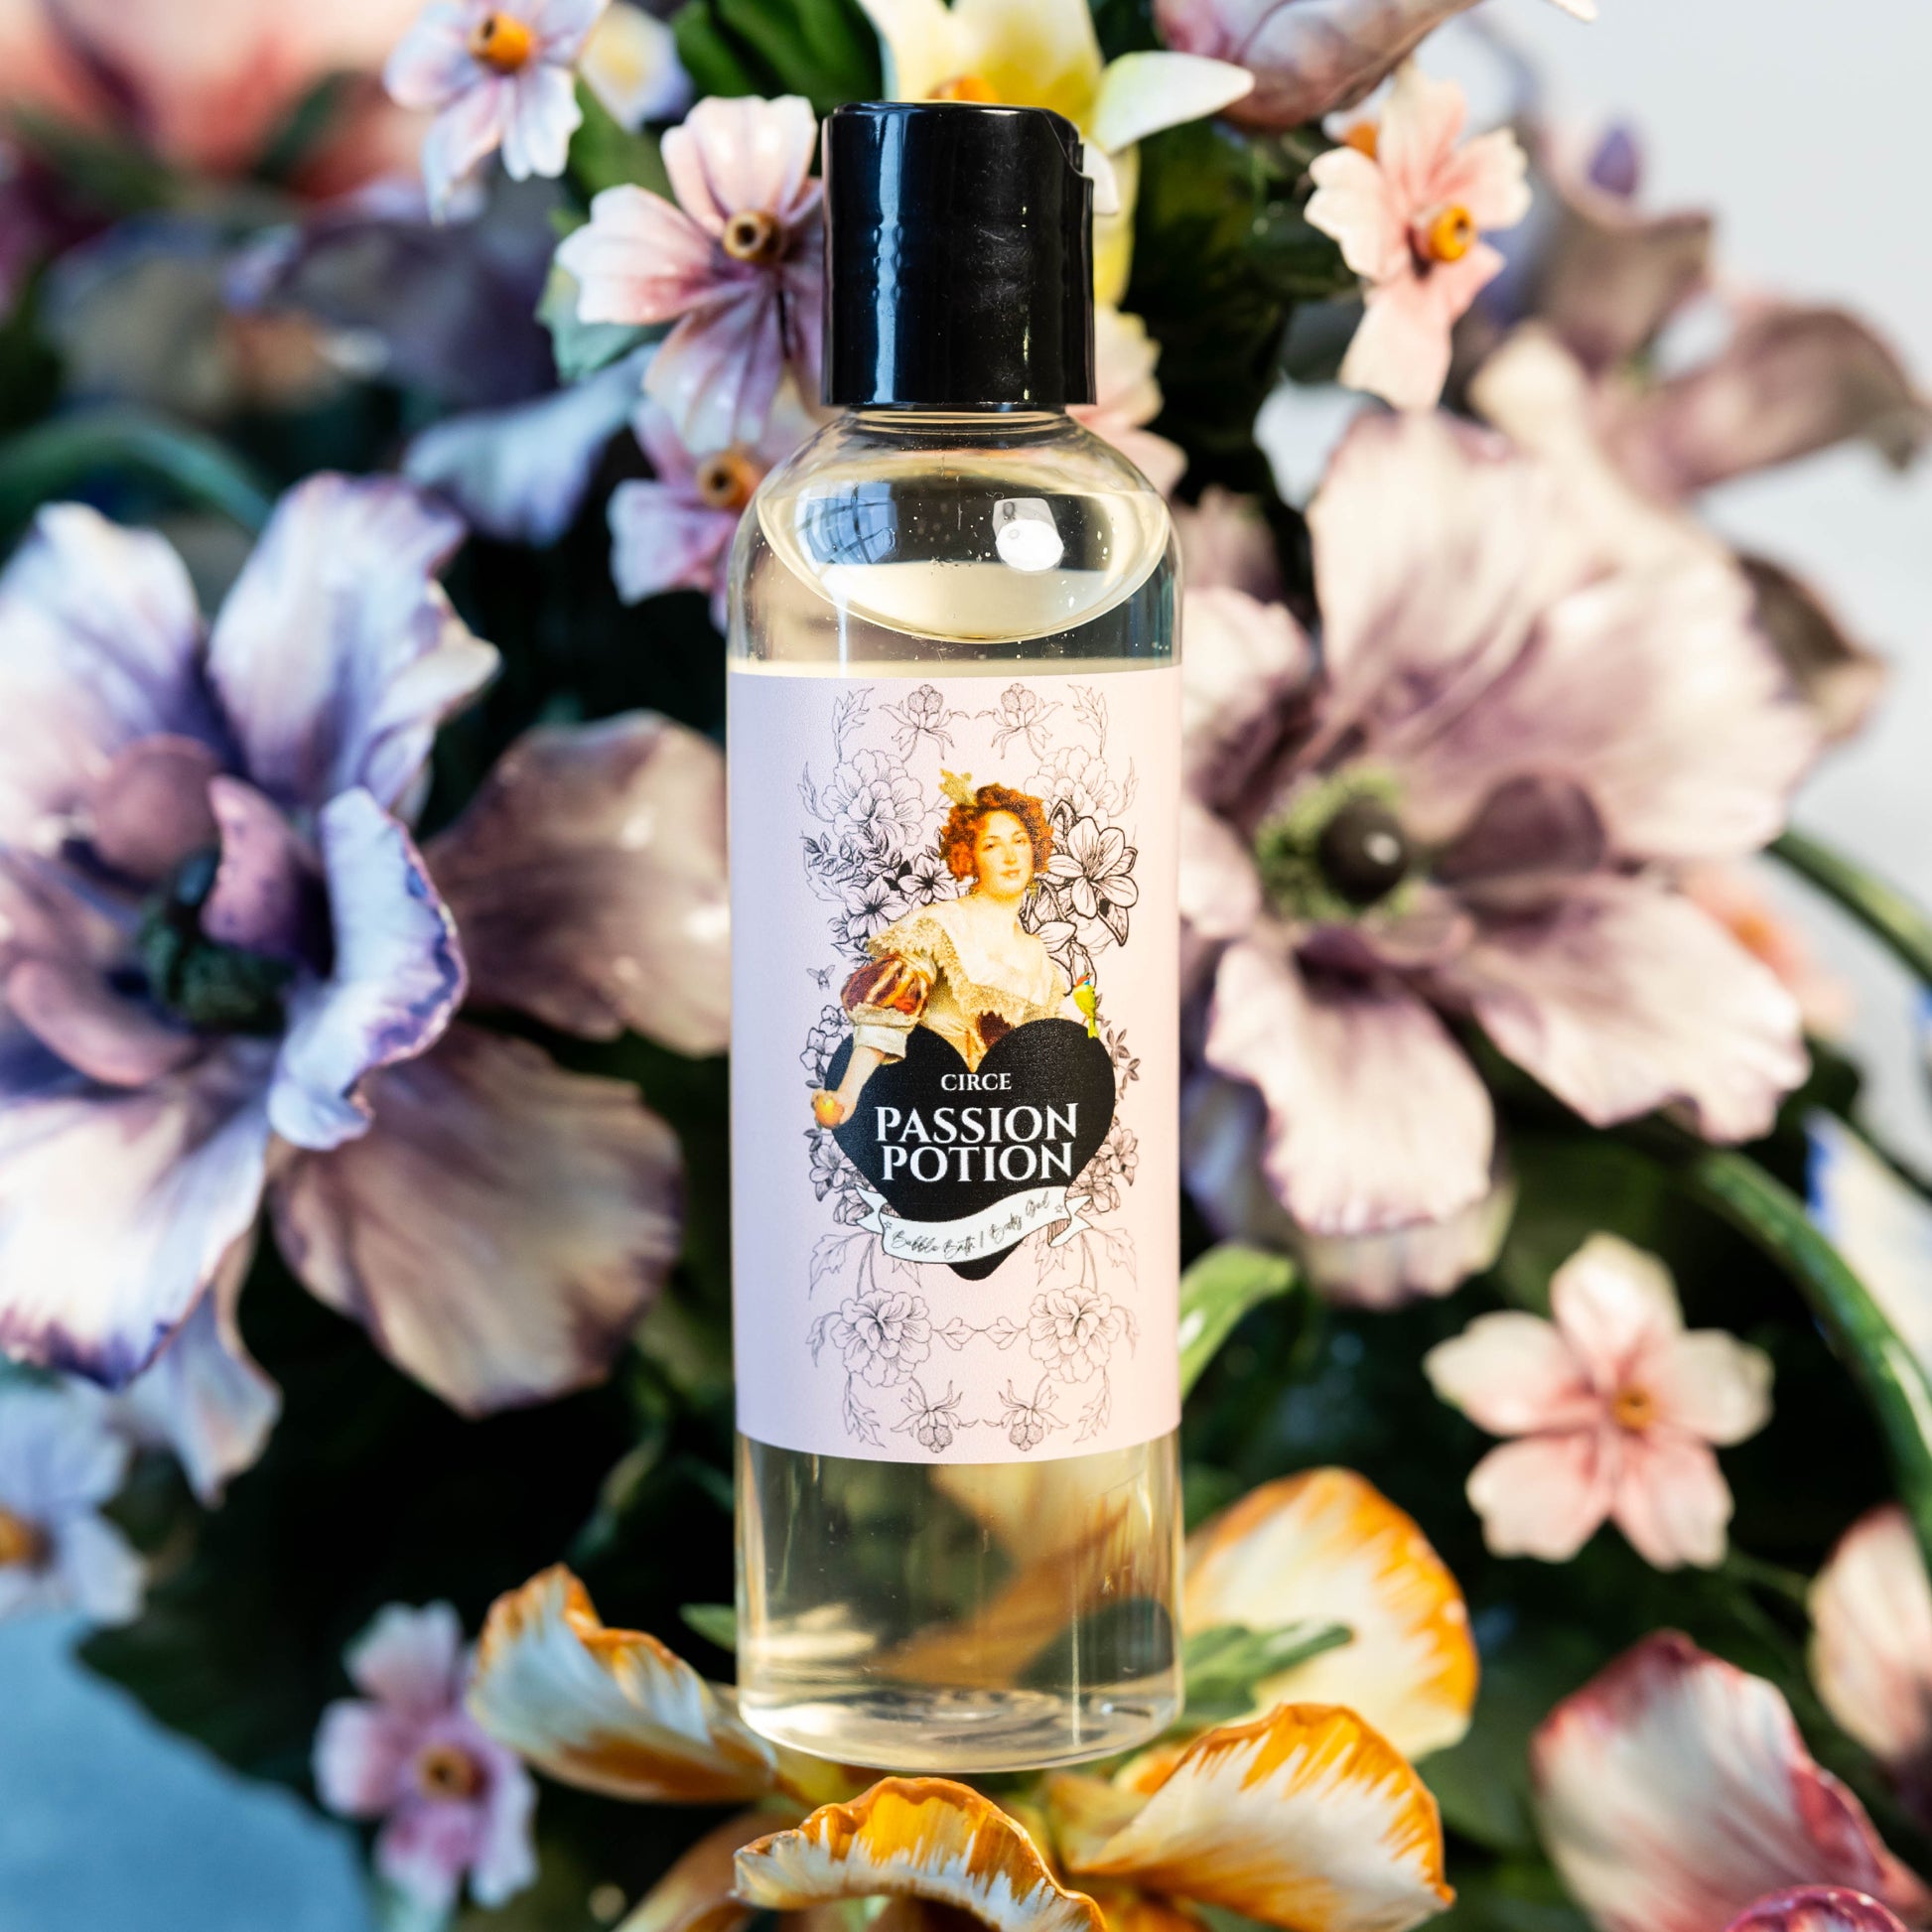 Passion Potion Pheromone Collection  from Wholesale Natural Body Care